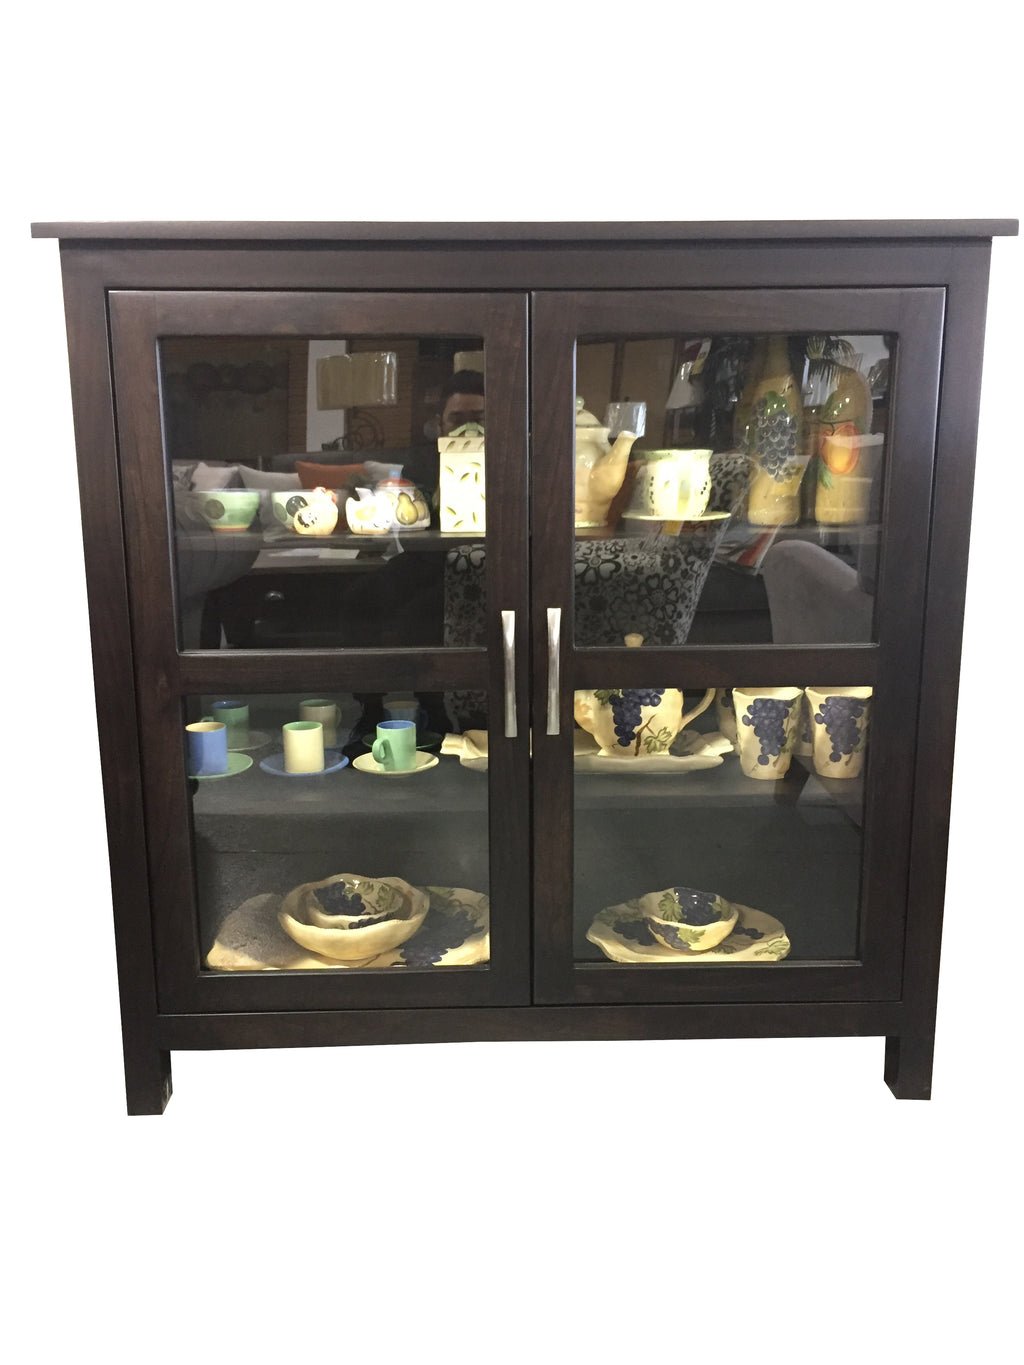 Urban Glass Display Cabinet - Showroom Special - 2003-2018 Homestead Furniture All Rights Reserved